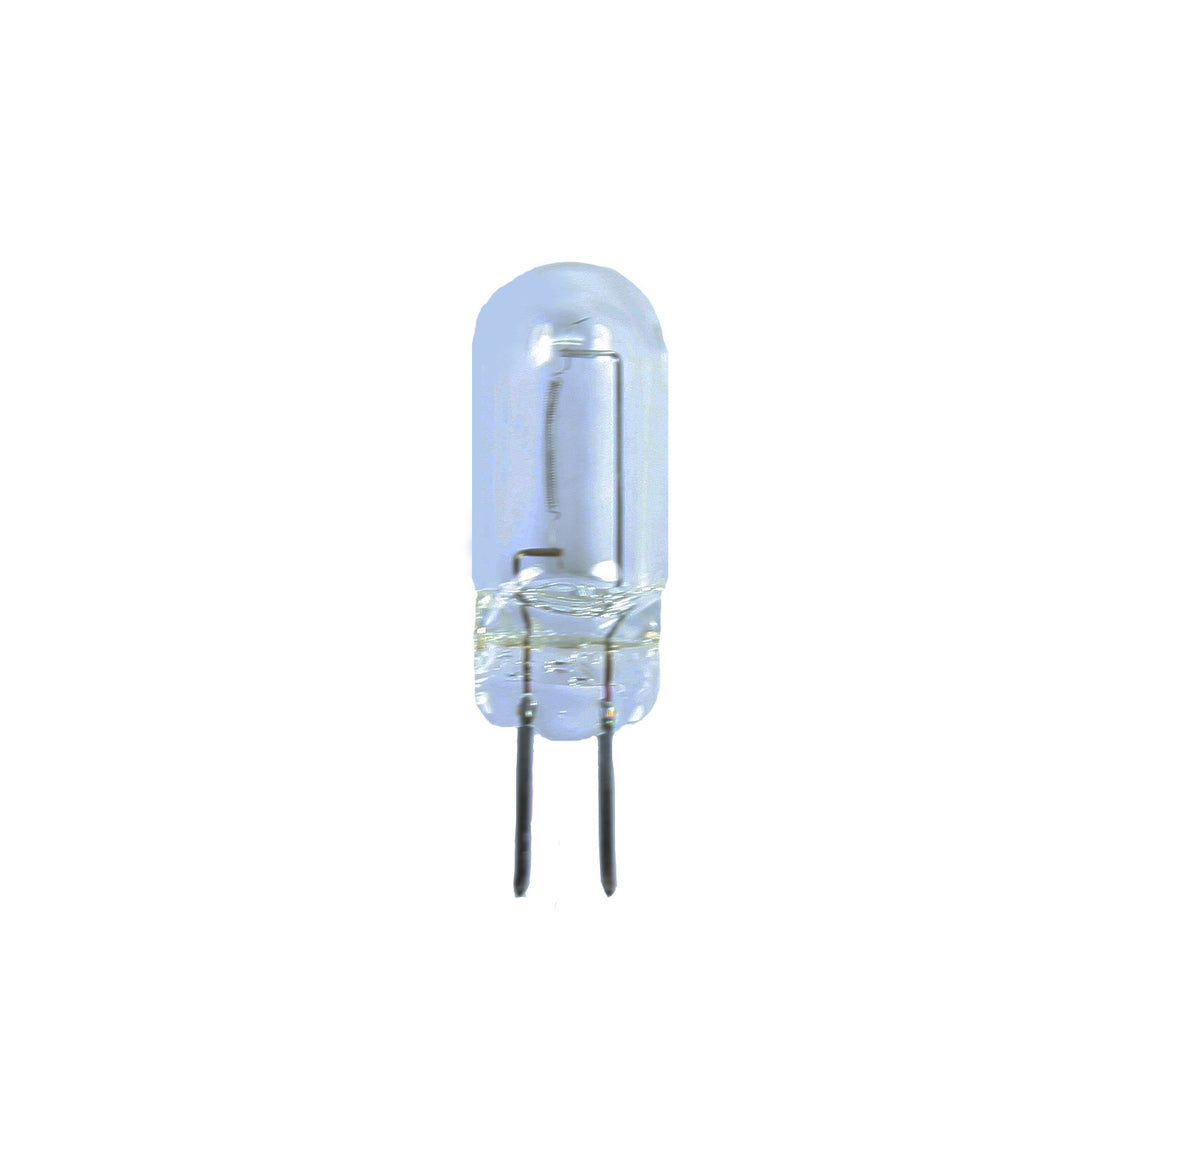 Replacement 12V 15W Halogen Bulb - 800-422